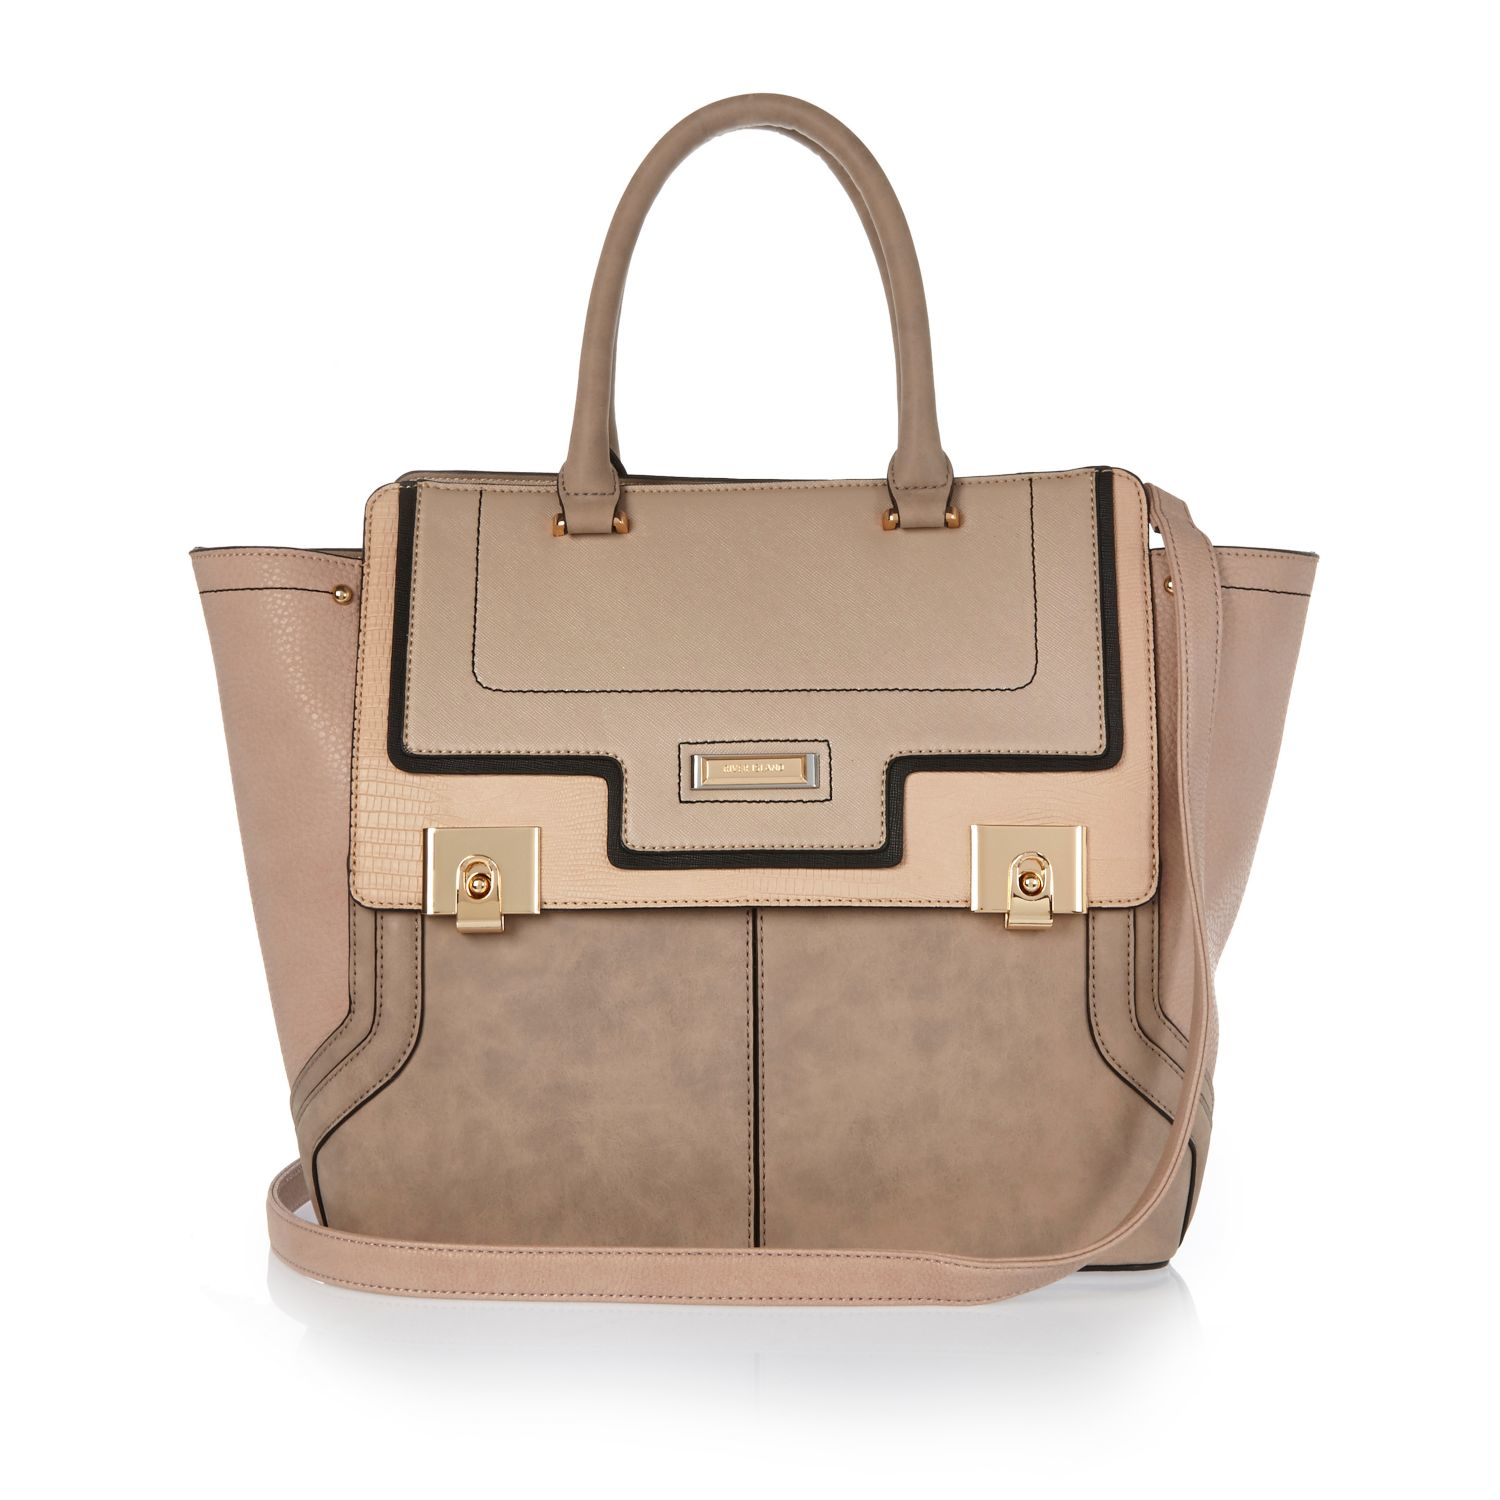 River Island Brown Paneled Double Lock Tote Bag - Lyst